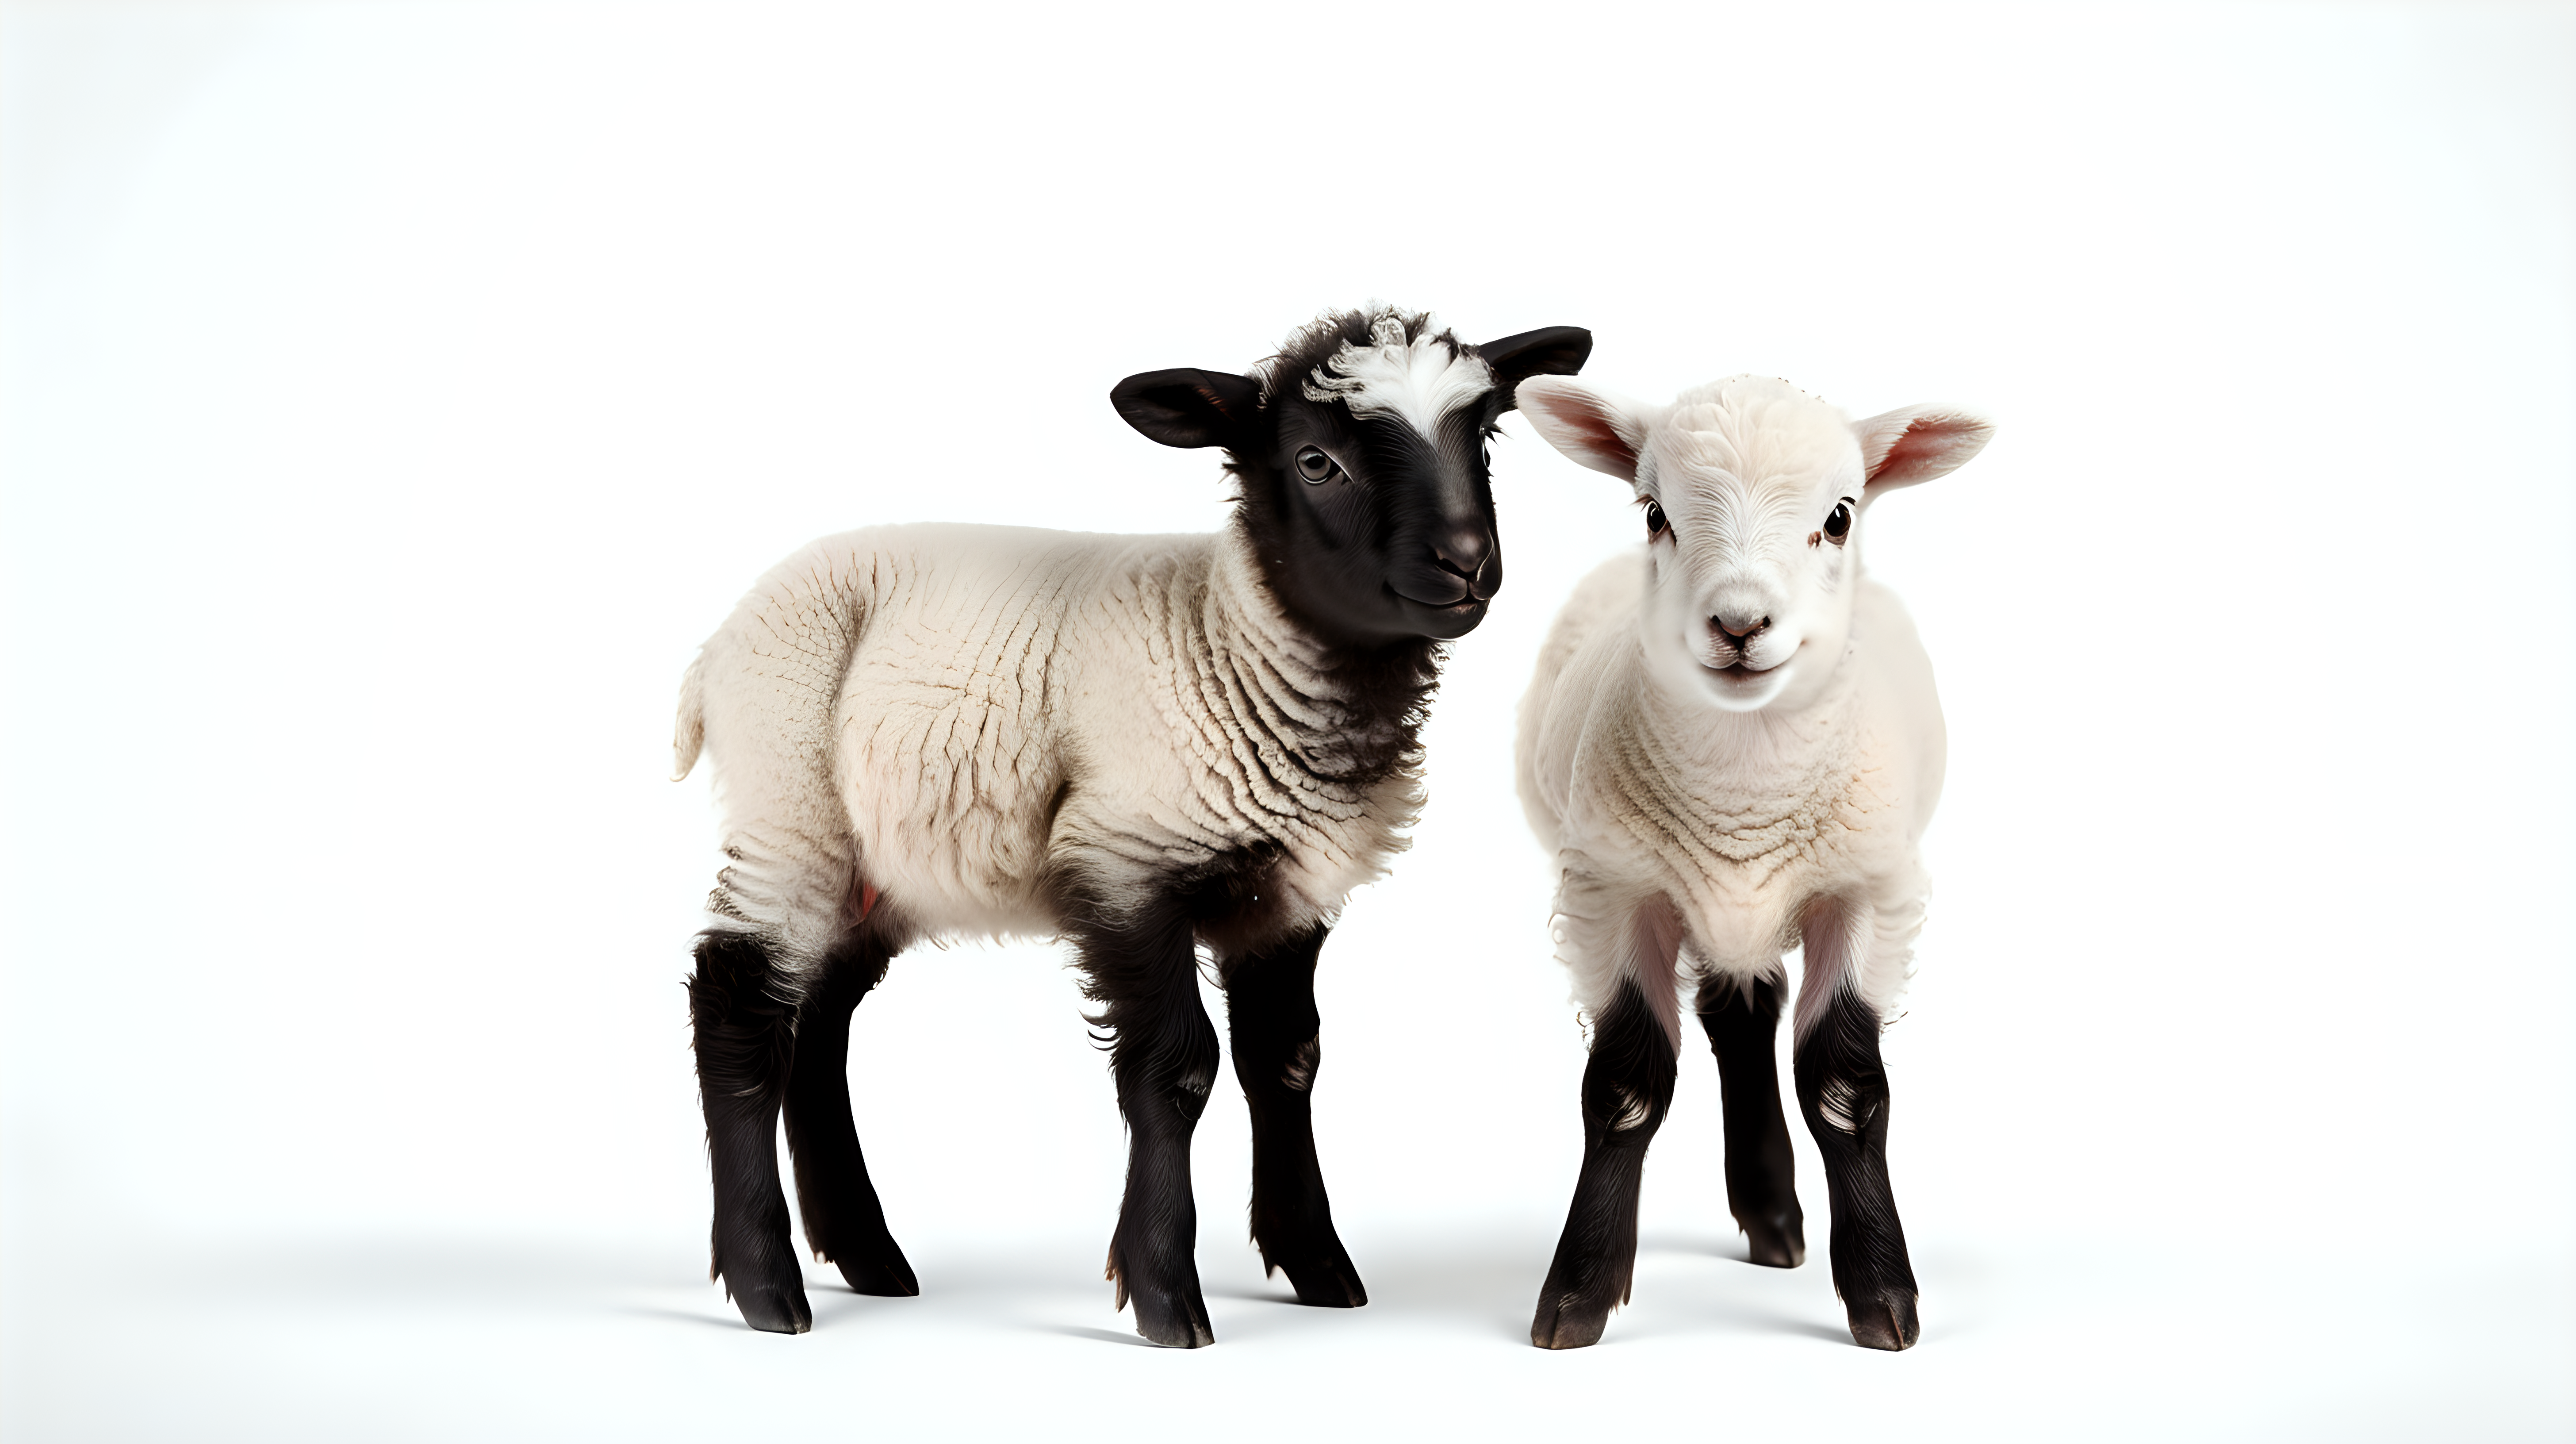 two baby sheep on white background, isolated on background